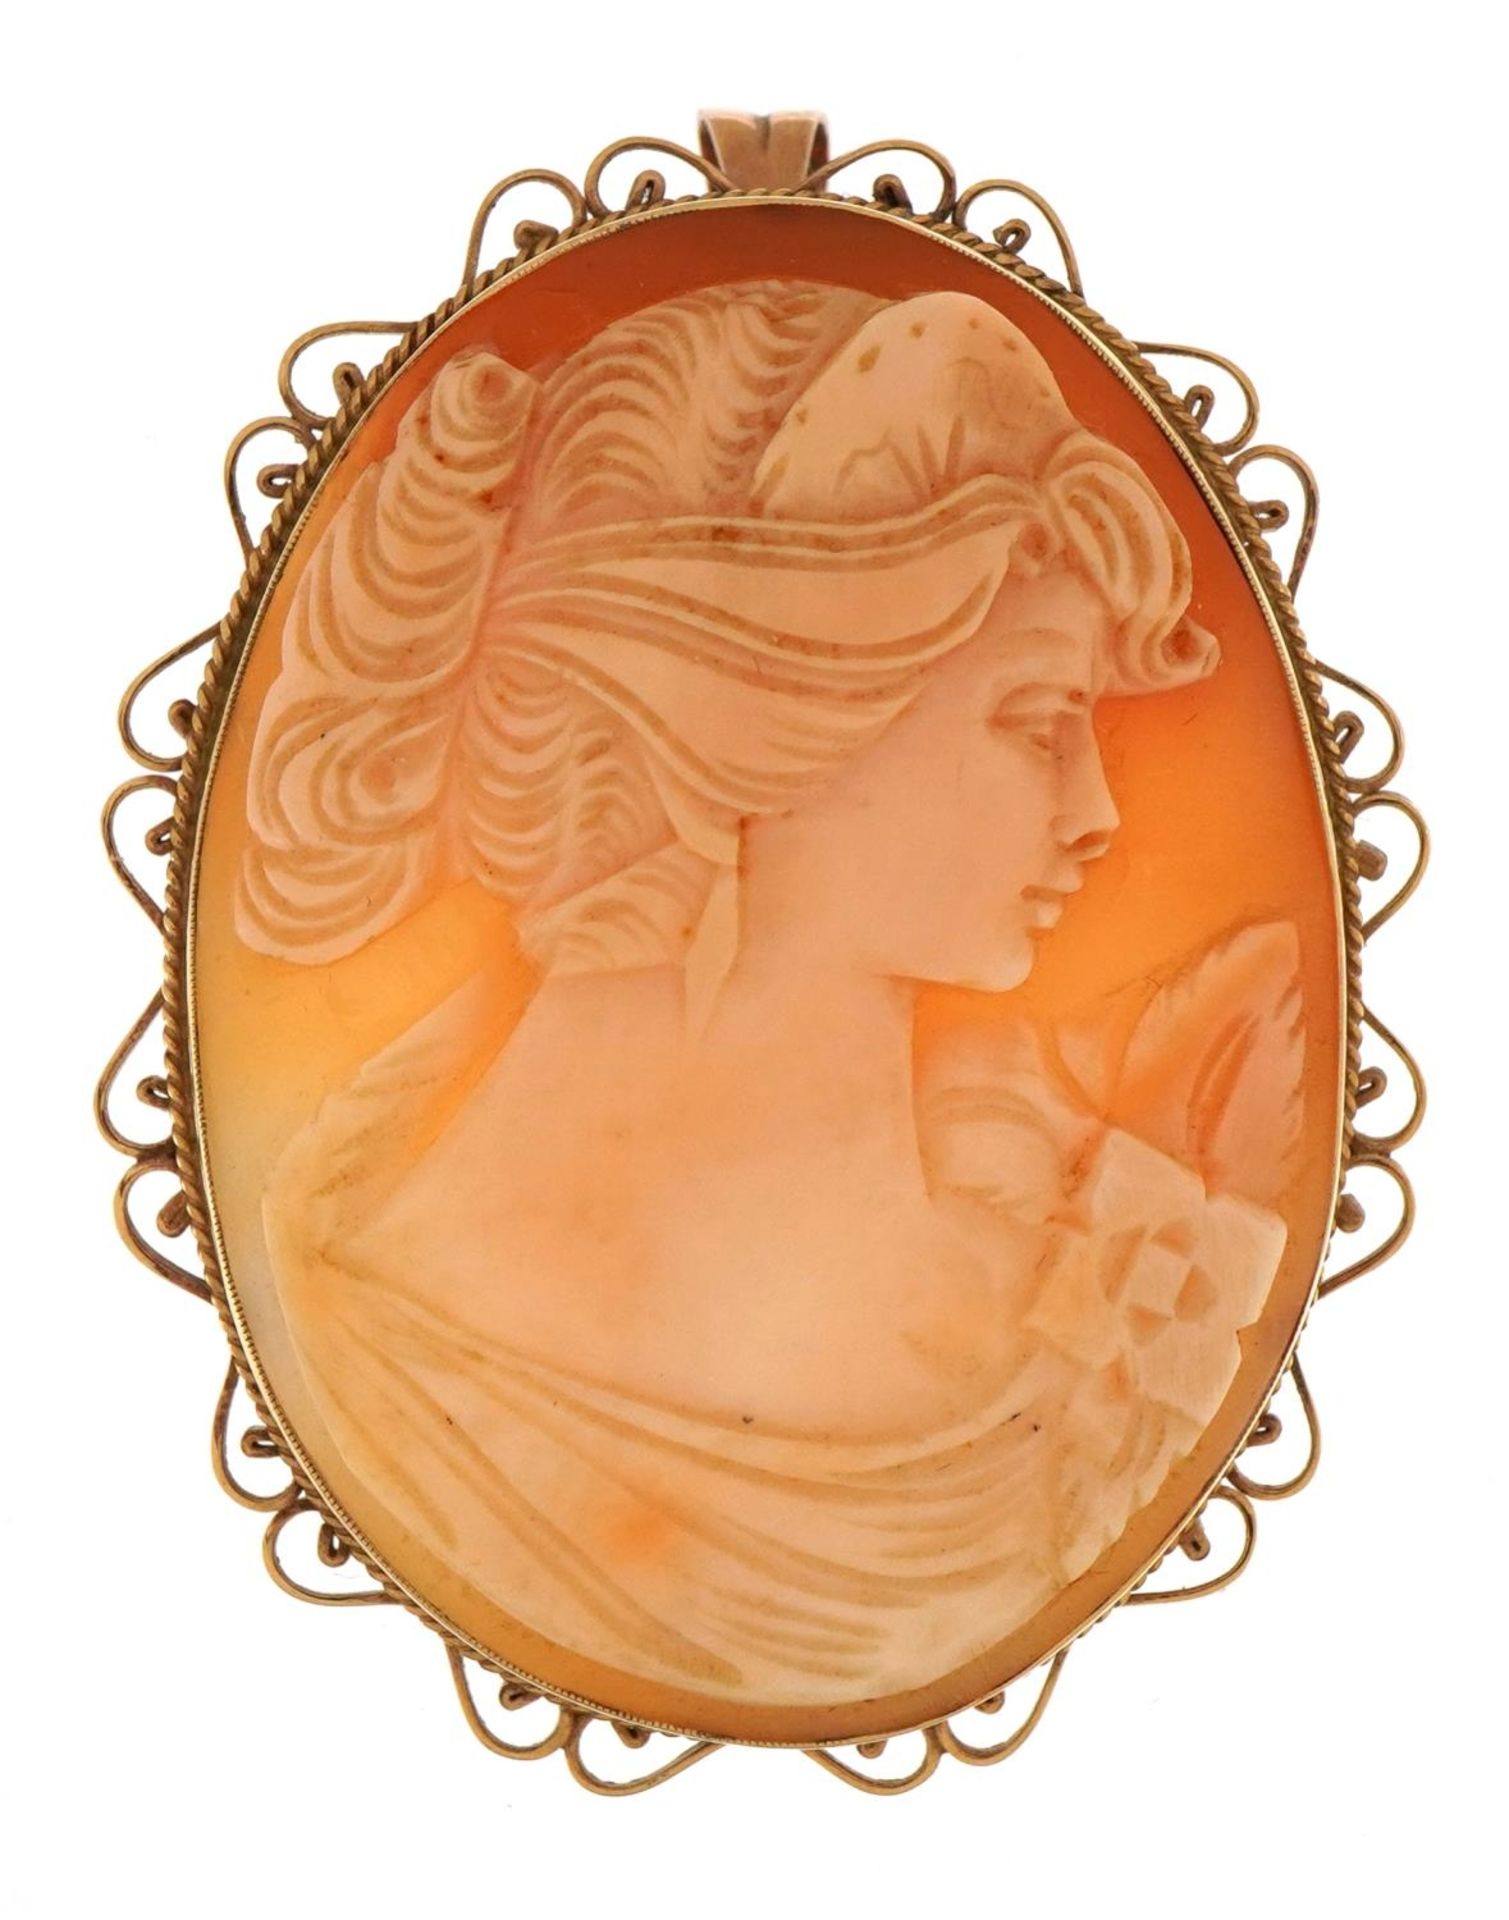 Large 9ct gold mounted cameo maiden head pendant brooch, 5.5cm high, 17.4g